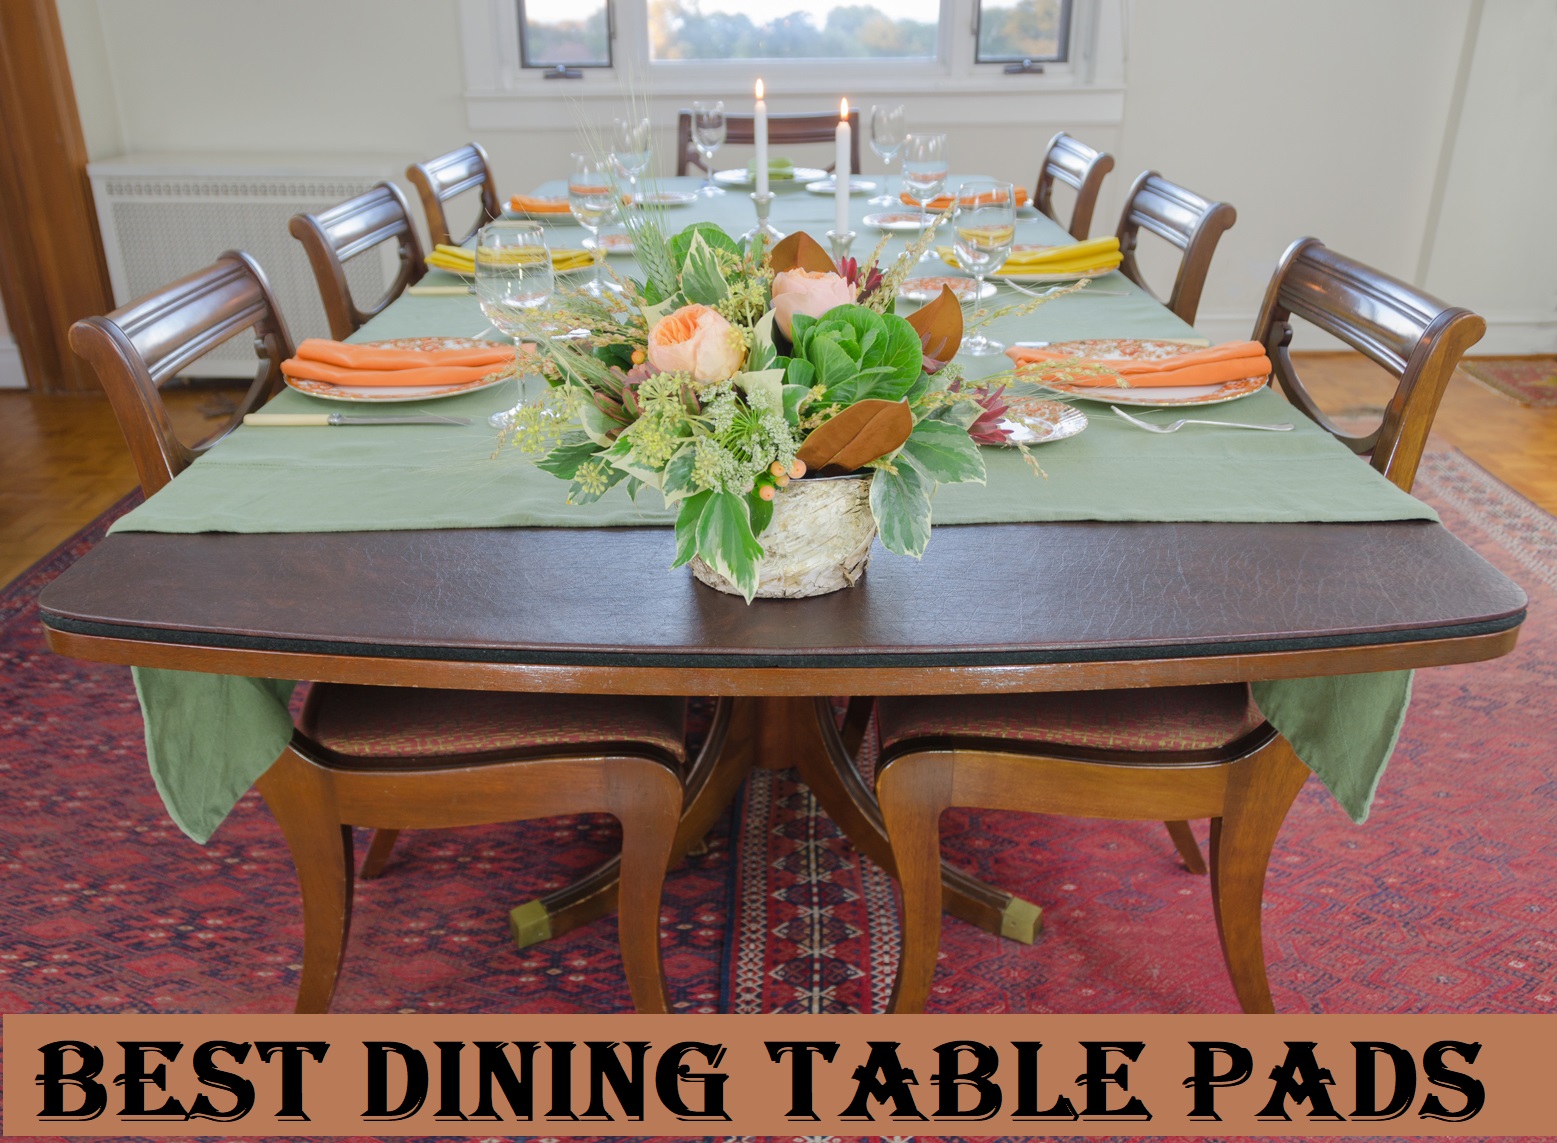 10 Best Dining Table Pads in 2020